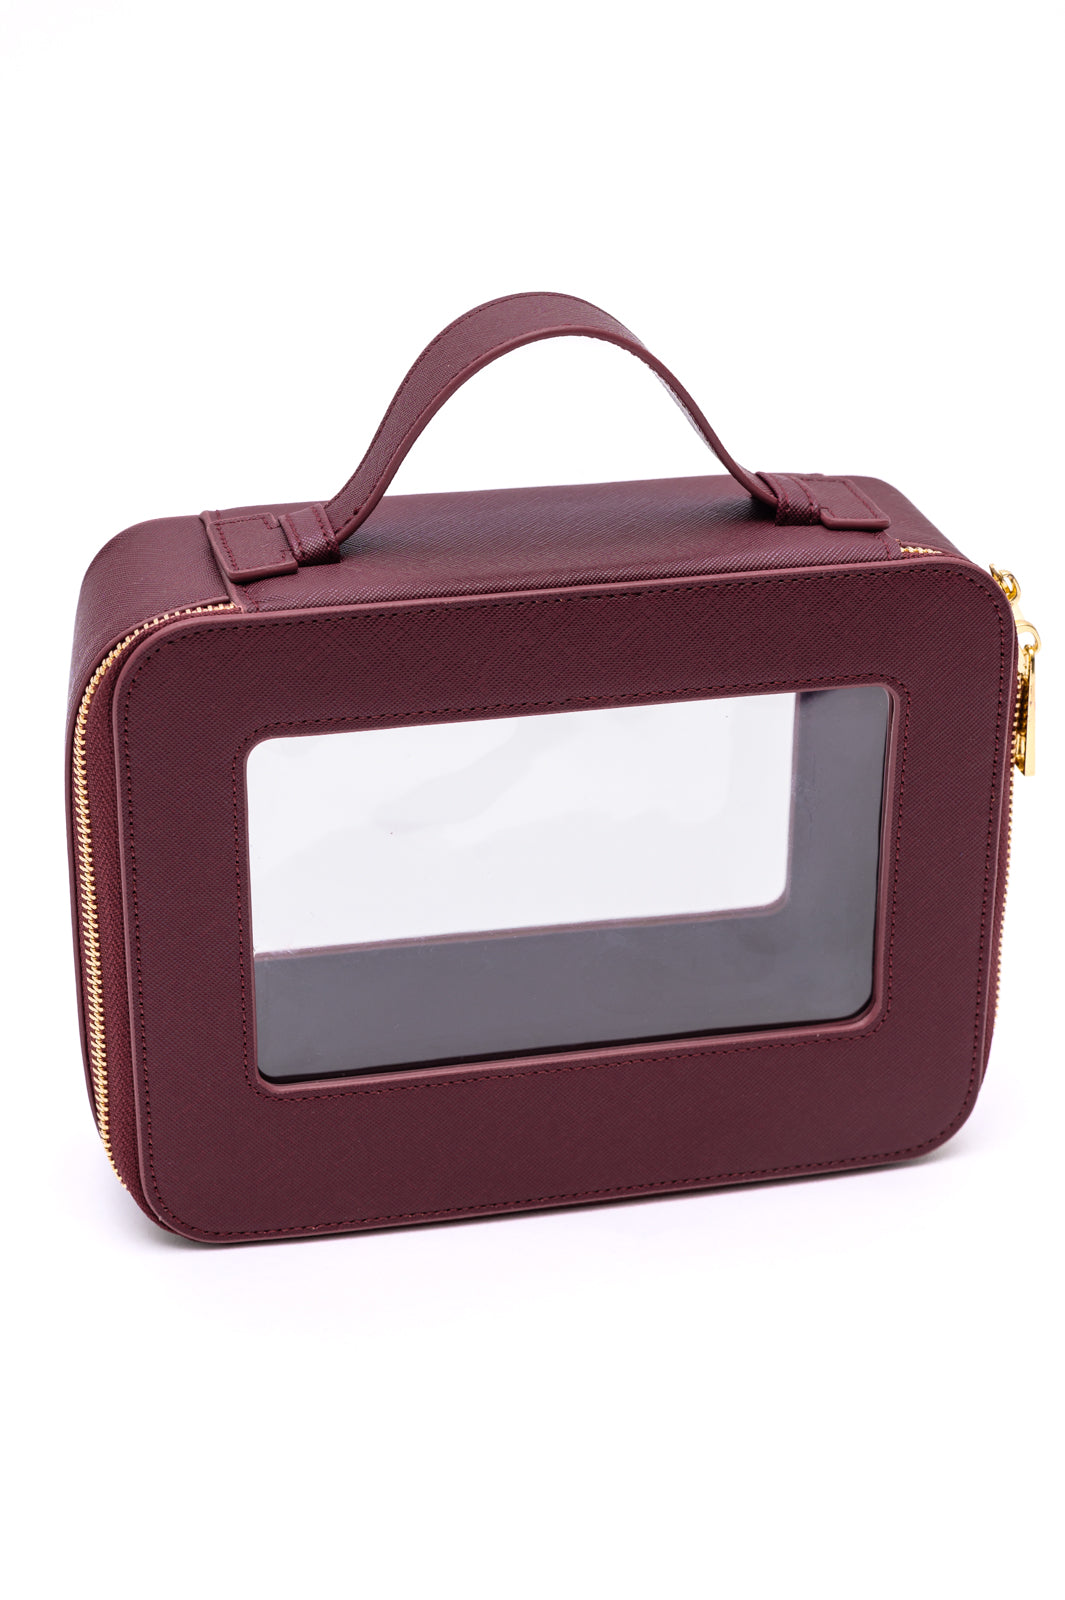 PU Leather Travel Cosmetic Case in Wine - 2/23